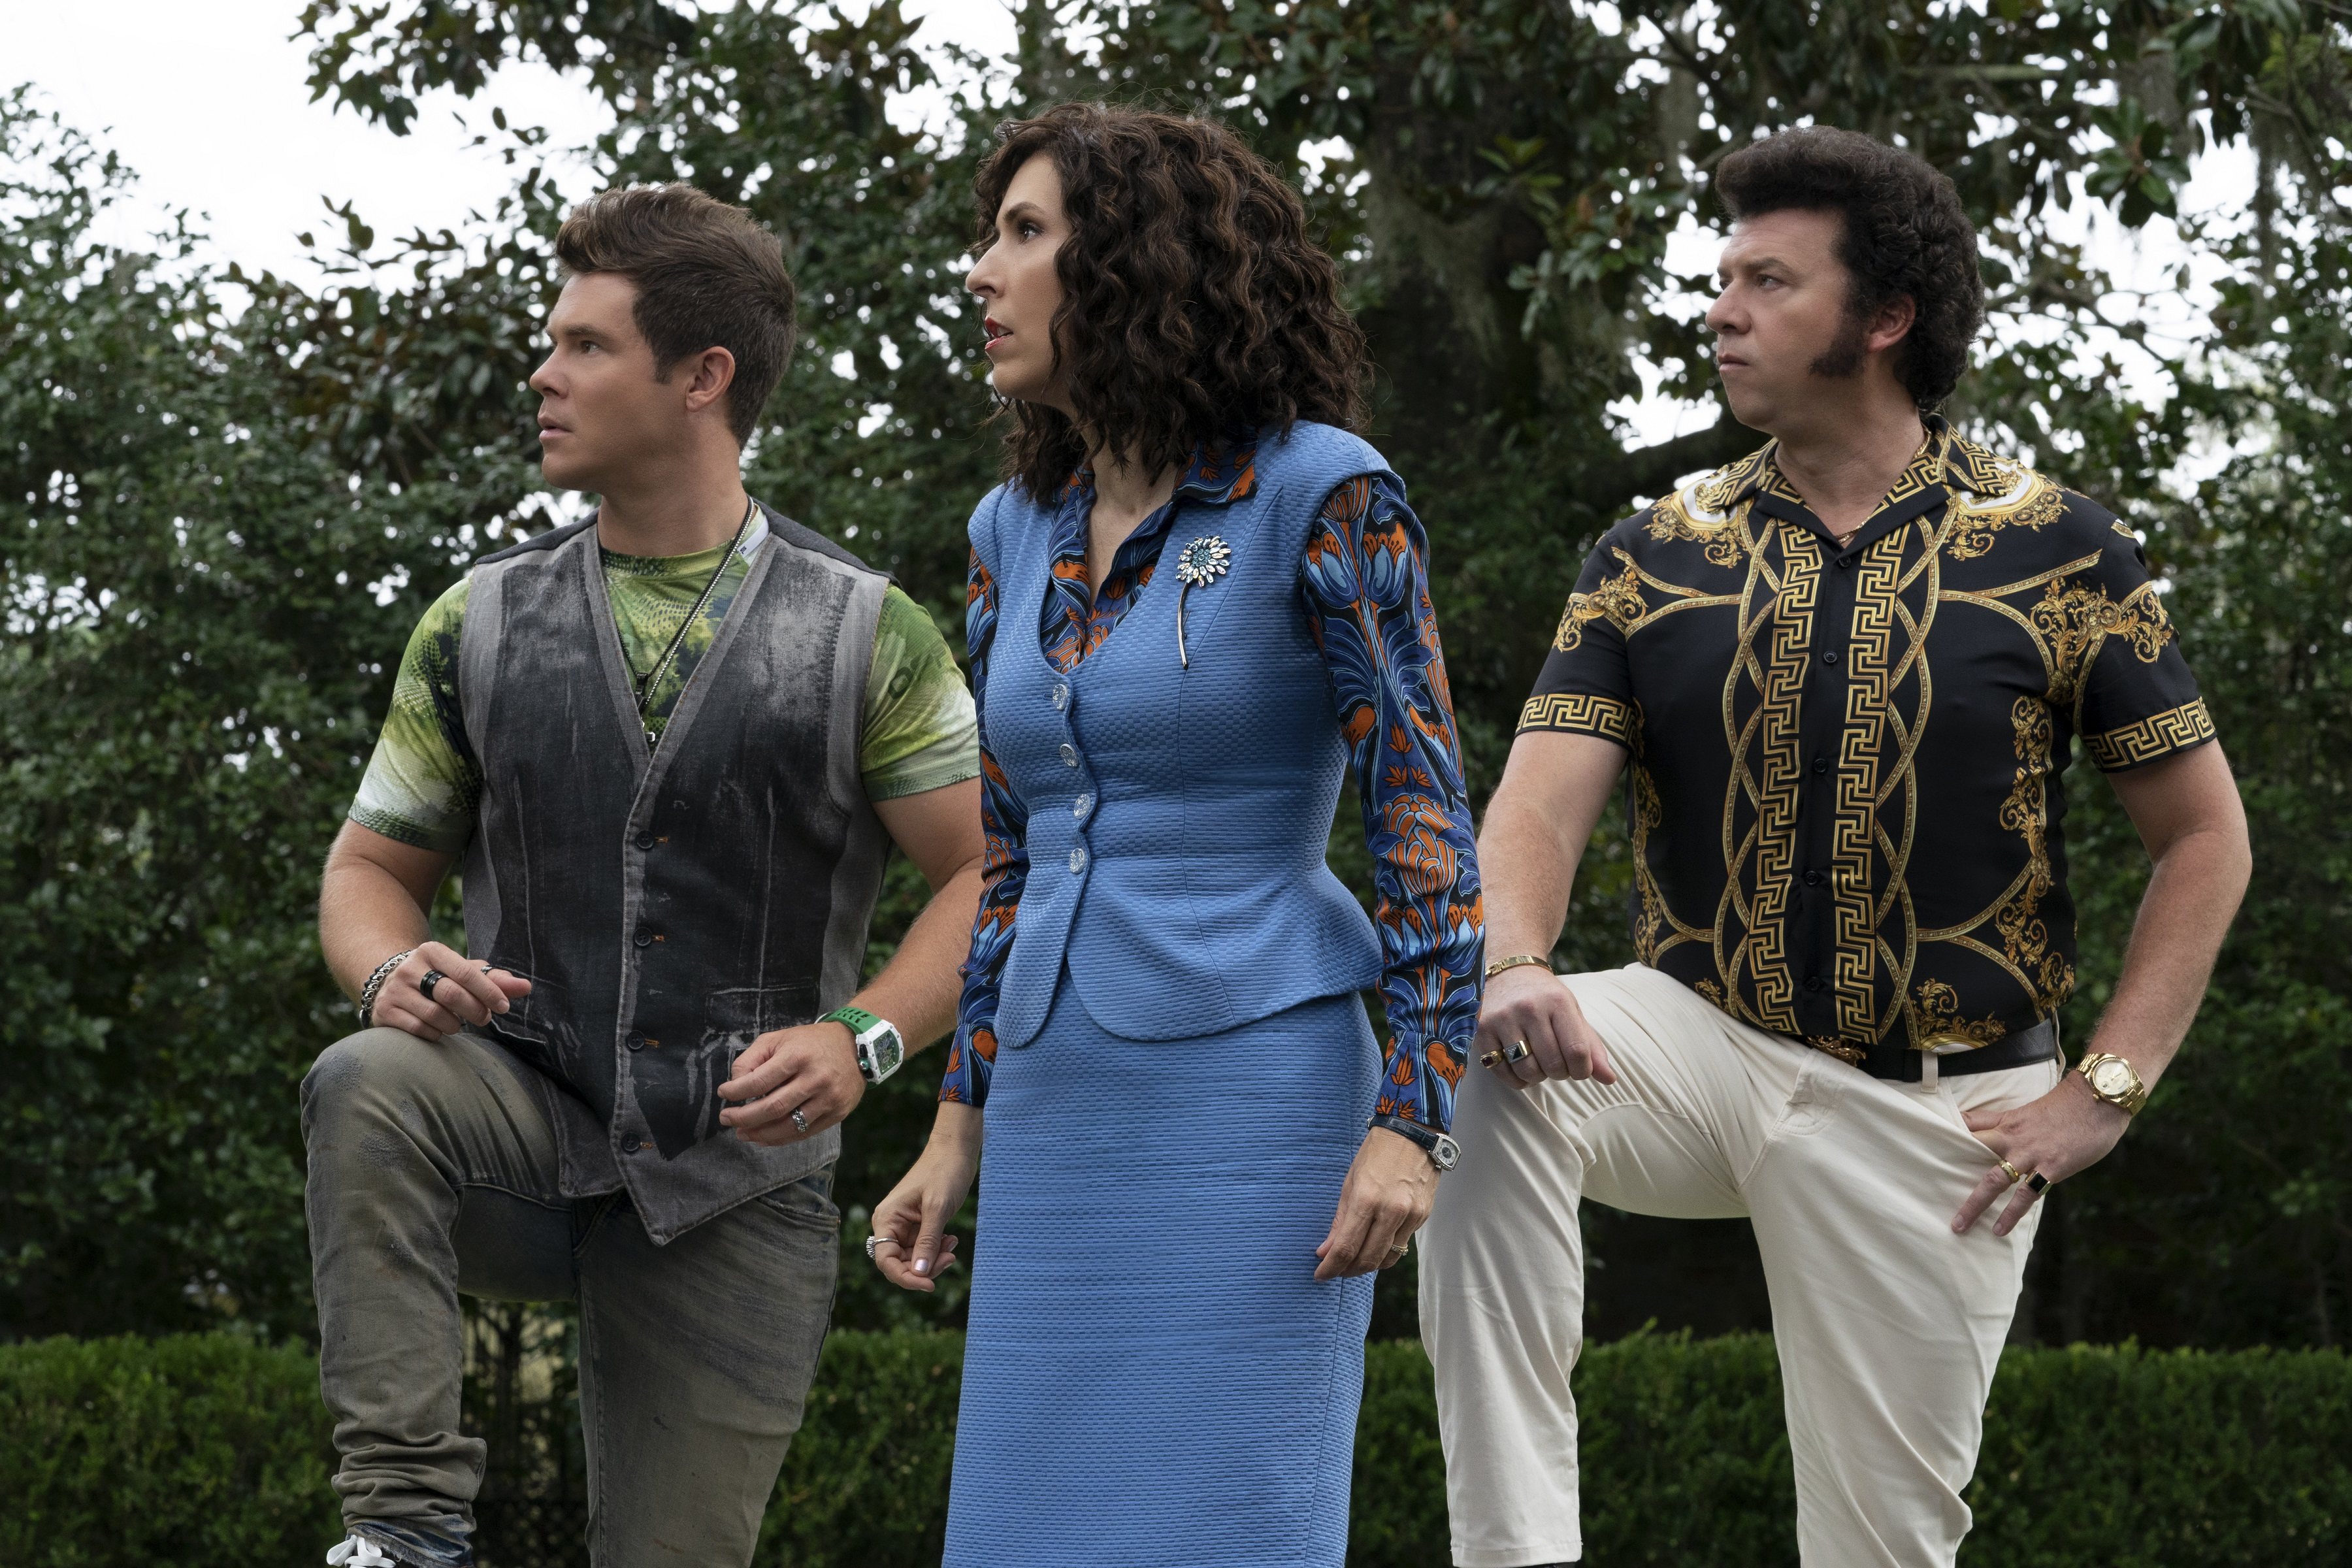 (From left) Adam DeVine, Edi Patterson and Danny McBride in a still from “The Righteous Gemstones”. The HBO show returns in third season to lampoon televangelism some more. Photo: HBO Go